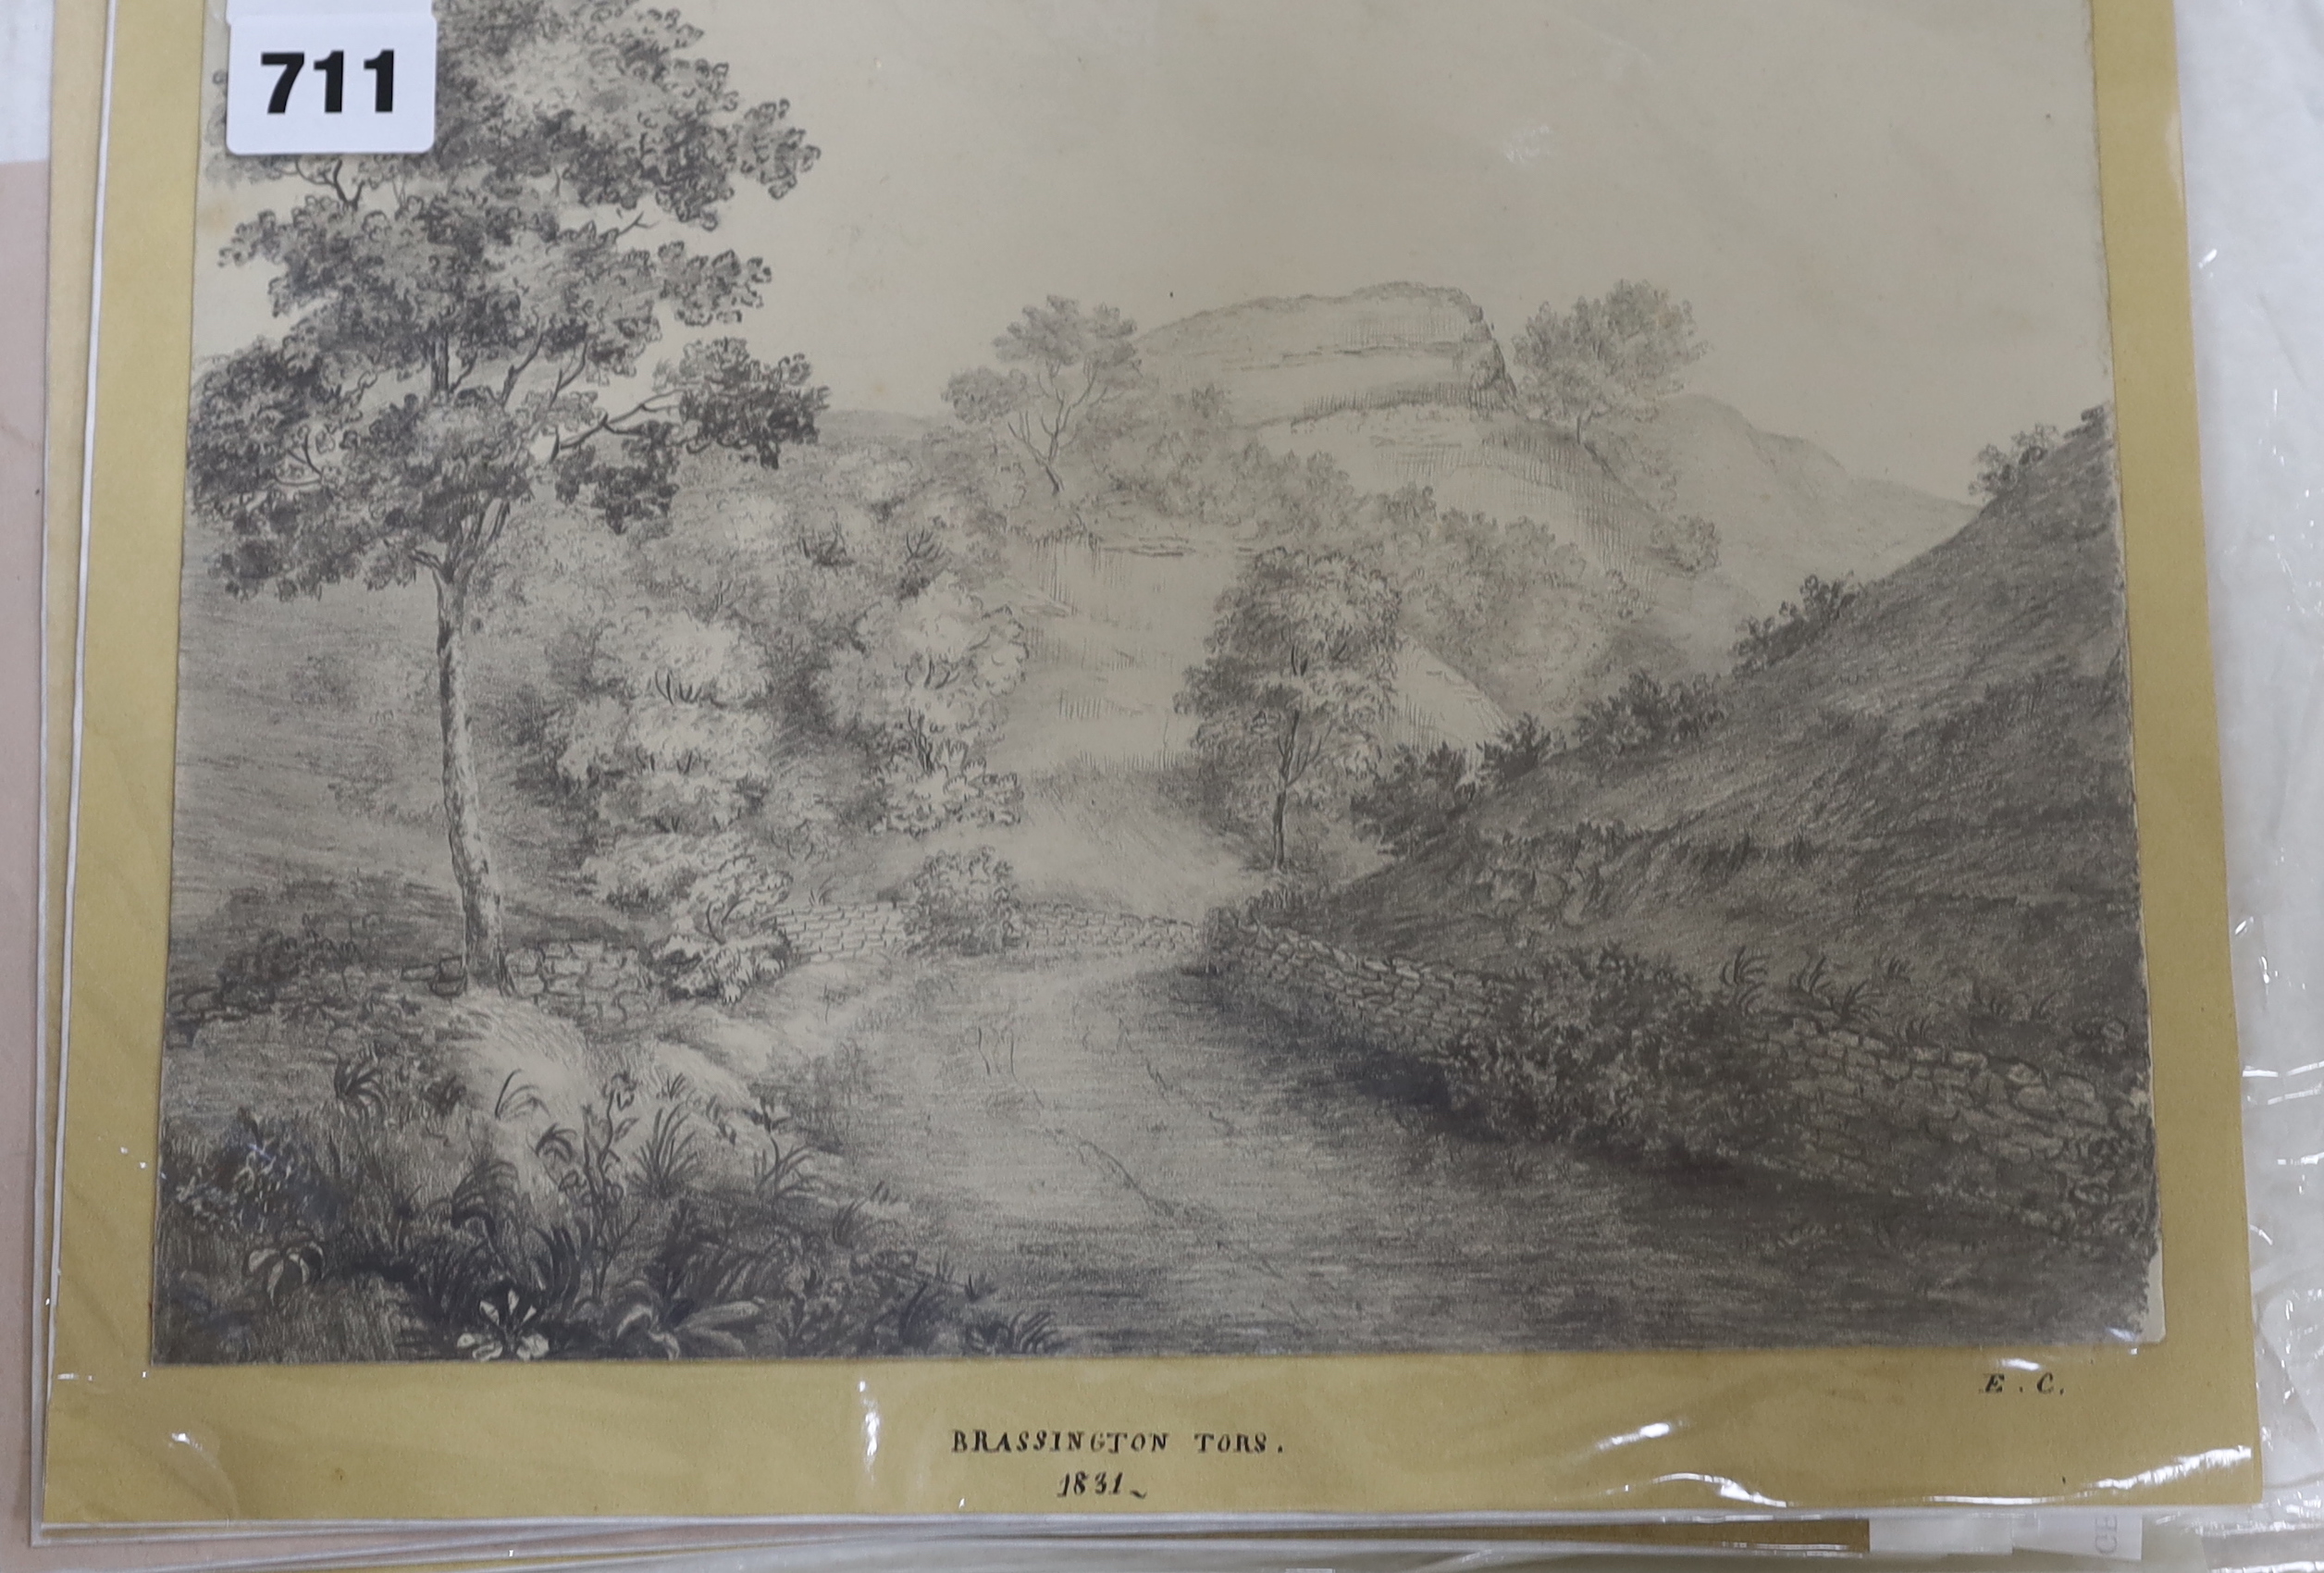 A collection of 19th century pencil sketches, Landscapes including some by John Hodgson, Scottish loch scenes and examples signed ‘Miss Walker’ including Brassington Tors, dated 1831, largest 22 x 28cm, all unframed